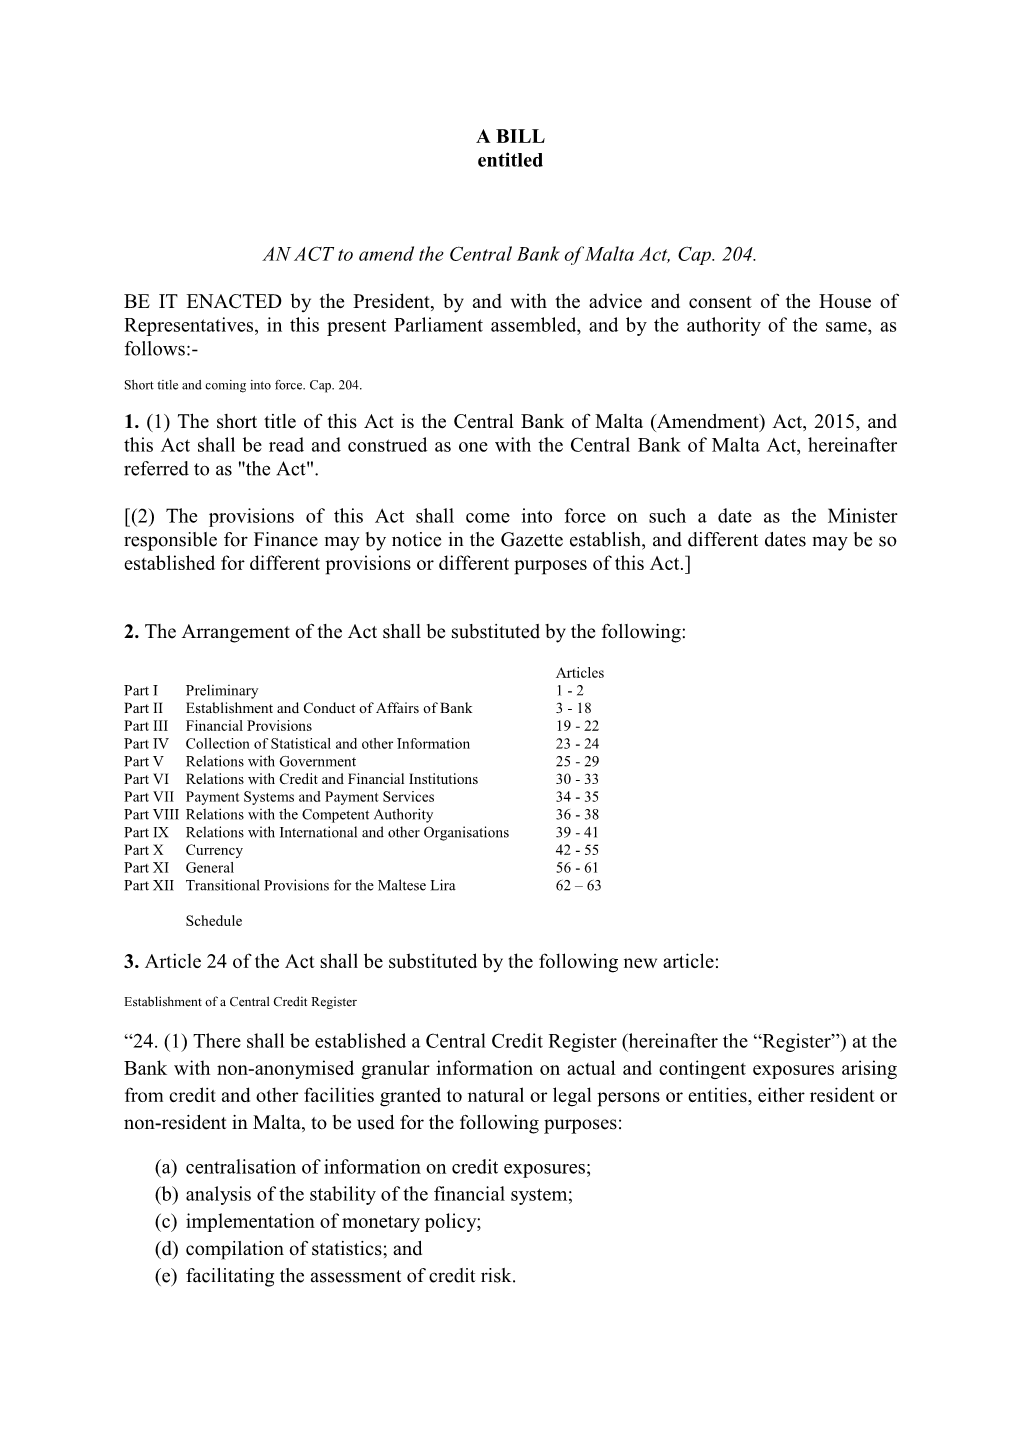 A BILL Entitled an ACT to Amend the Central Bank of Malta Act, Cap. 204